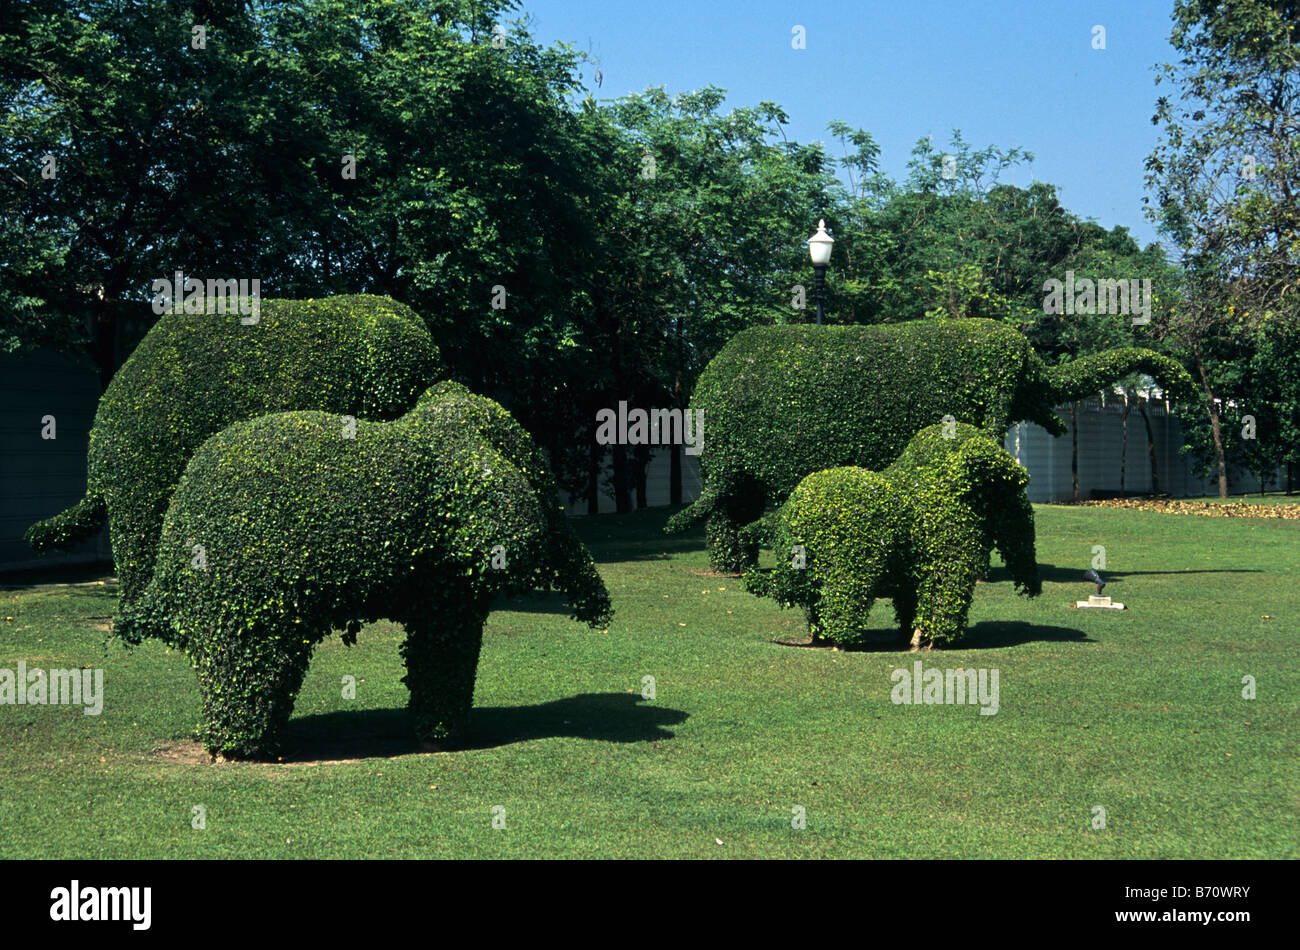 Bushes trimmed into Topiary Elephants in the Topiary Garden, Bang Pa-In Palace (Royal Summer Palace), Thailand Stock Photo